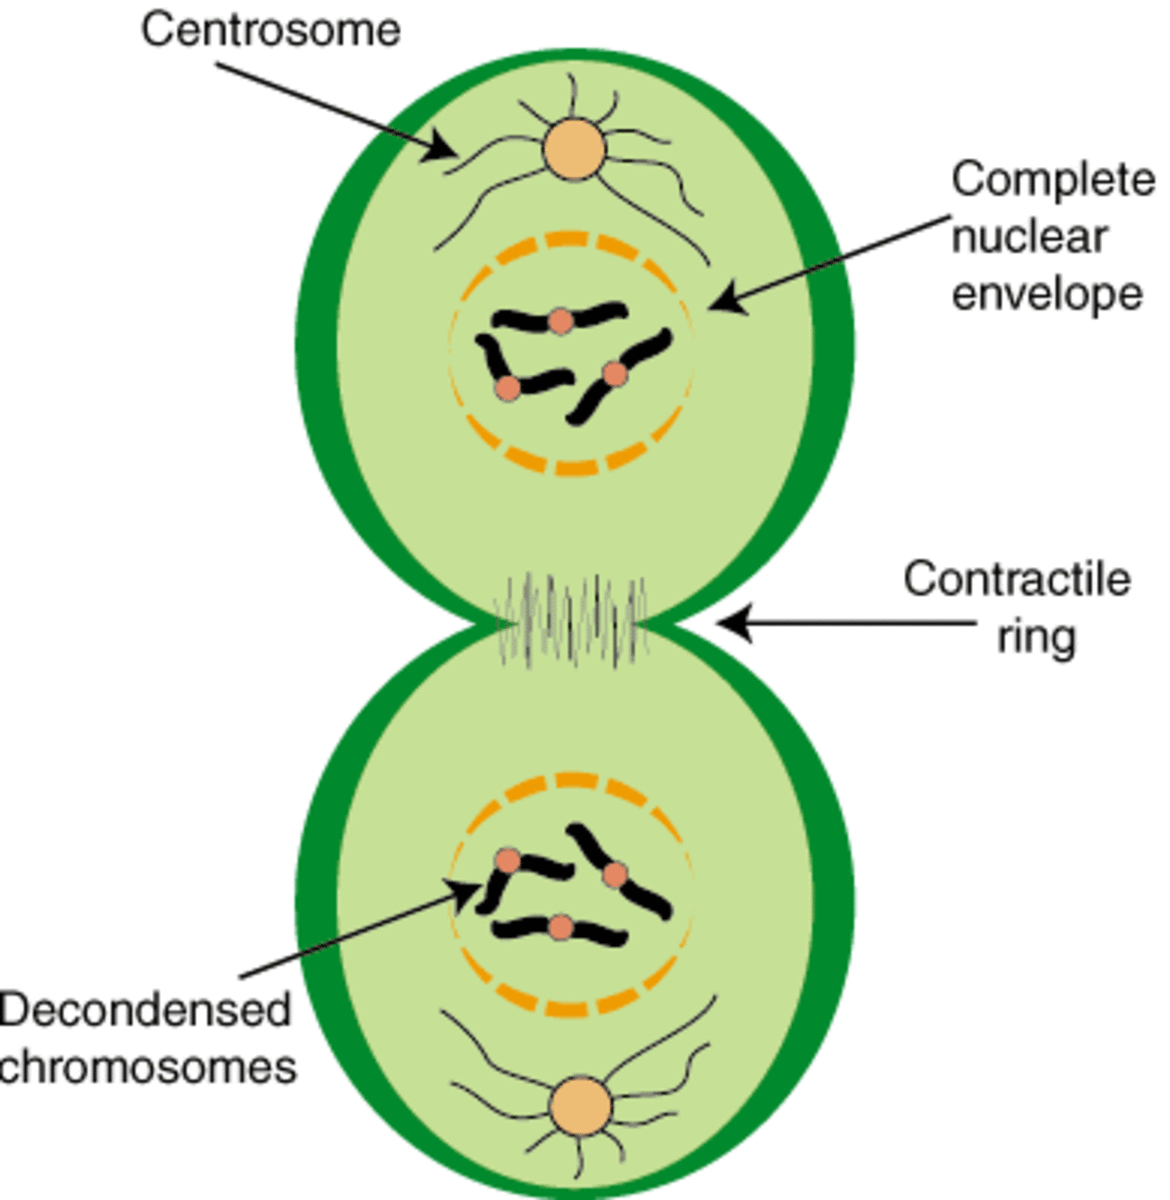 Cytokenesis in animals cells: the contractile fibres in the contractile ring 'pinch' the cell into two from the middle.